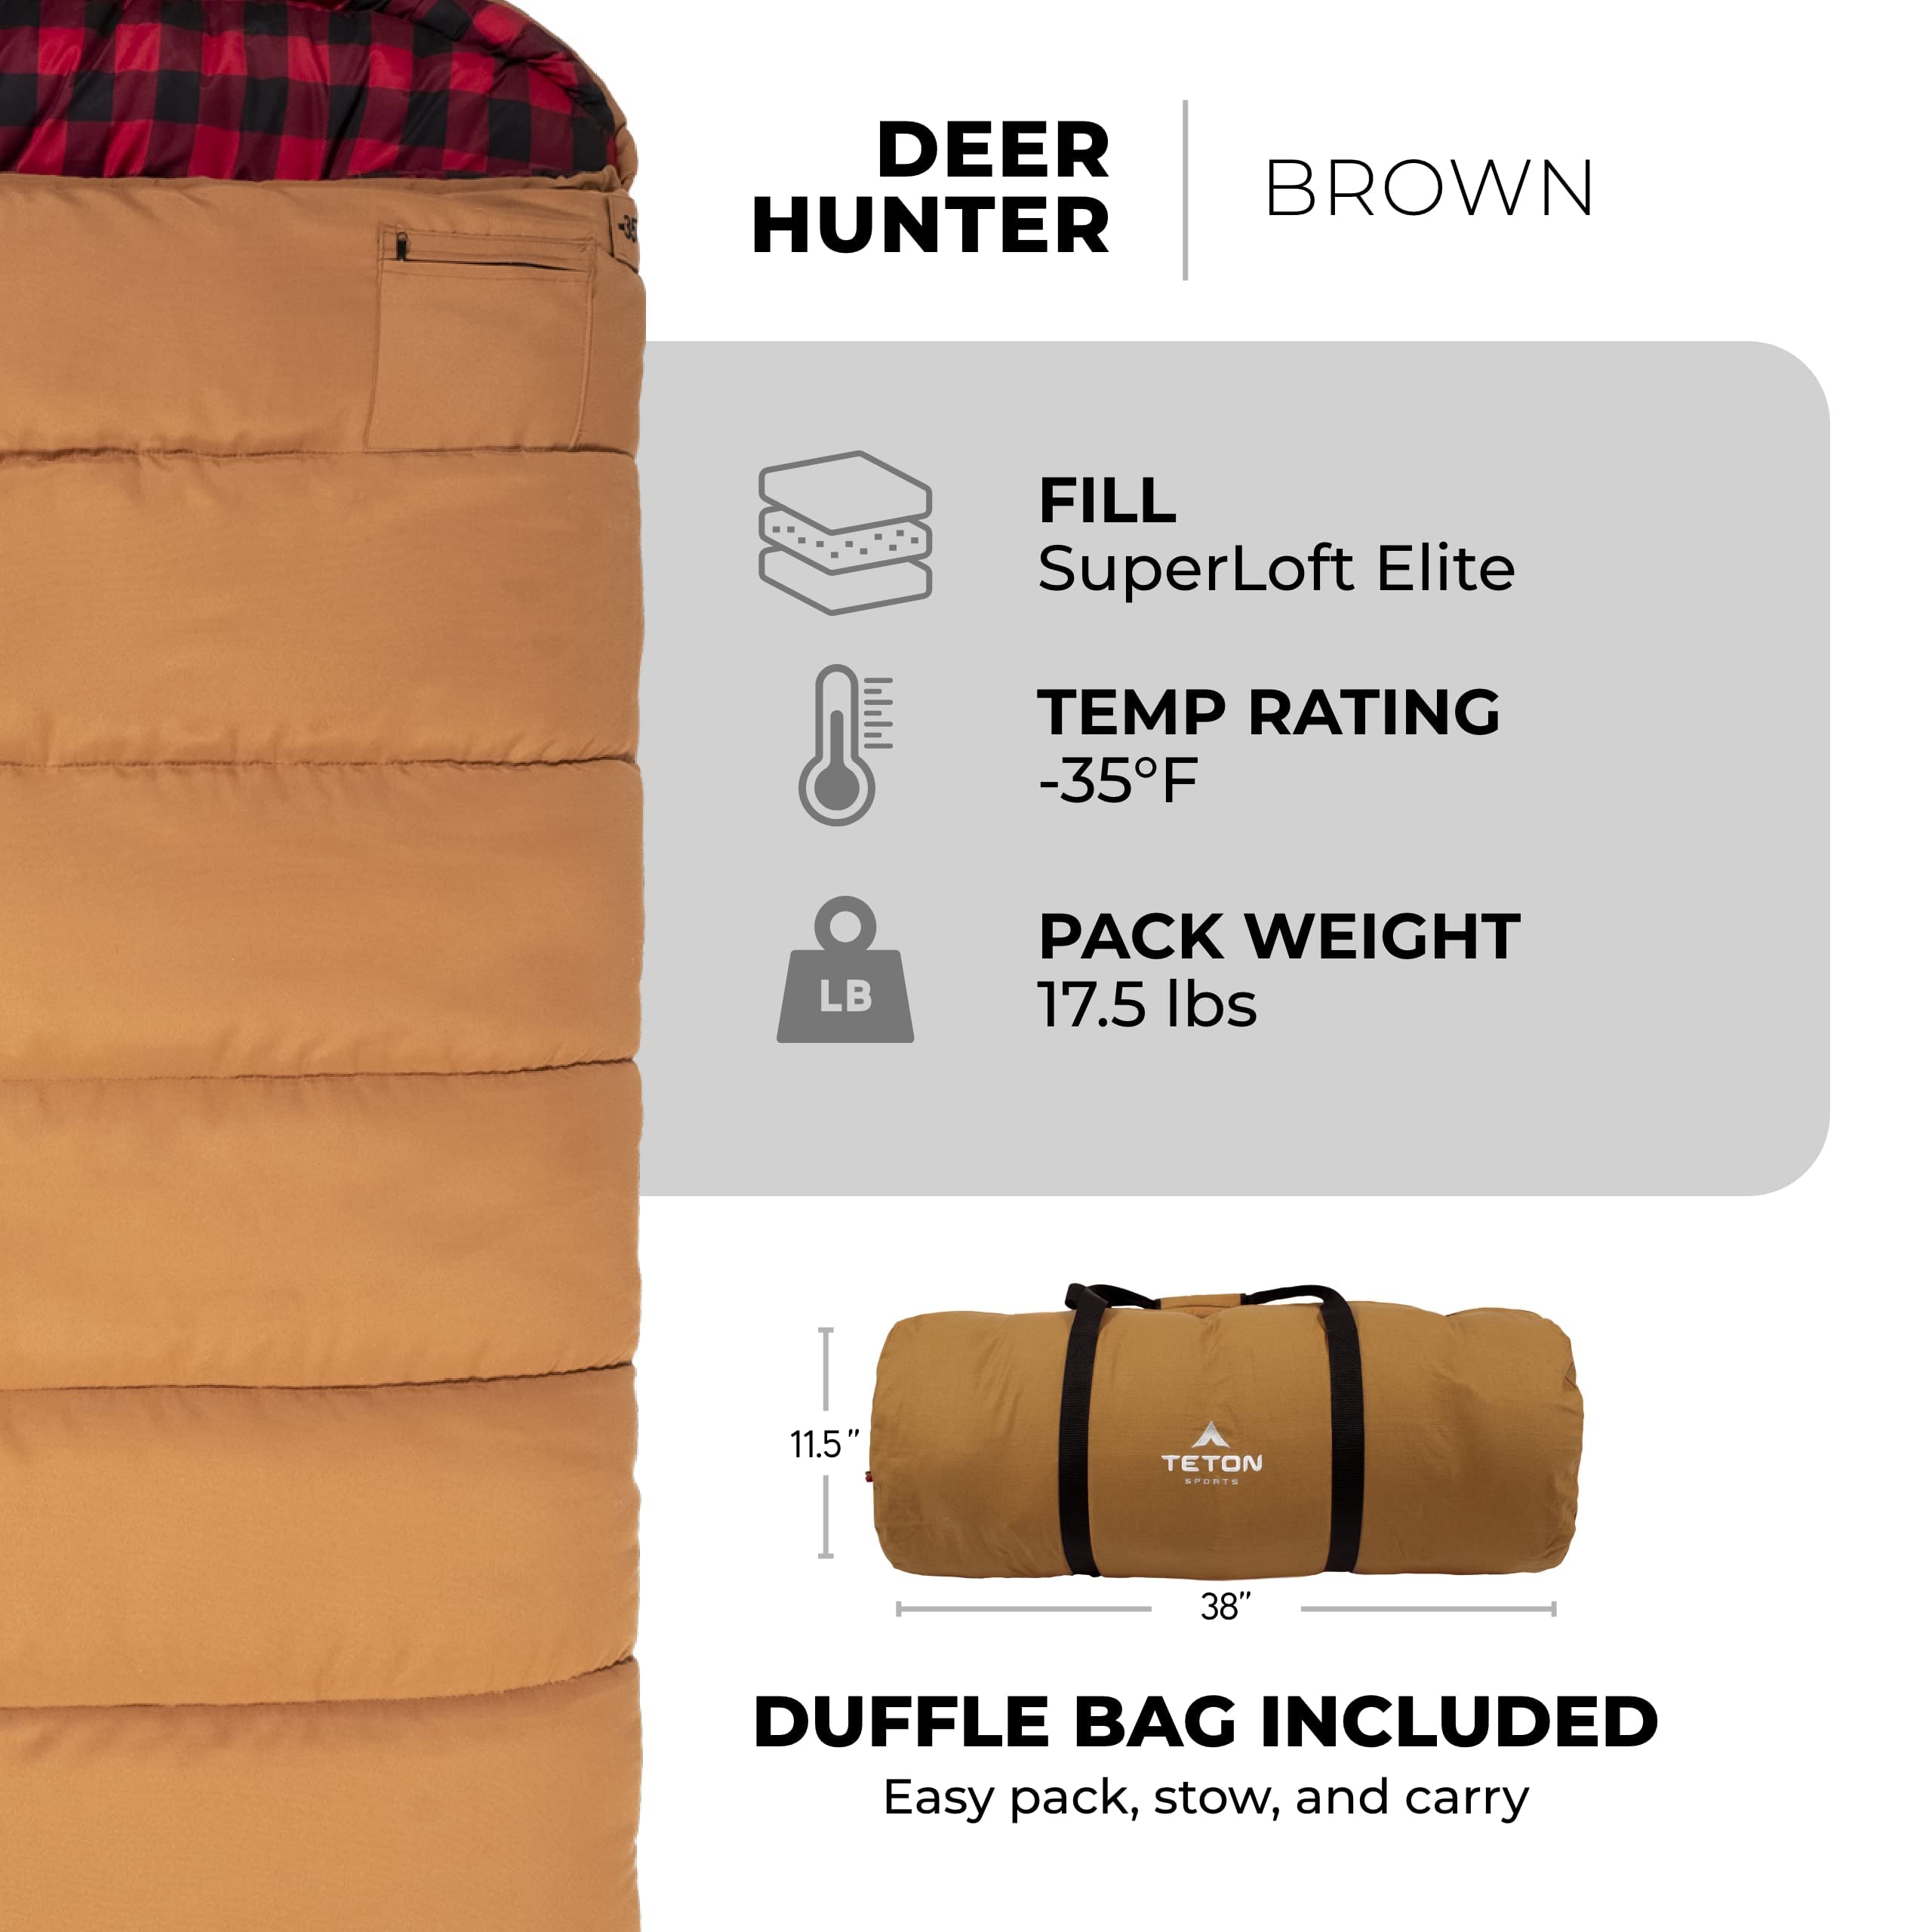 TETON Sports Deer Hunter Sleeping Bag; Warm and Comfortable Sleeping Bag Great for Camping Even in Cold Seasons; Brown, Right Zi